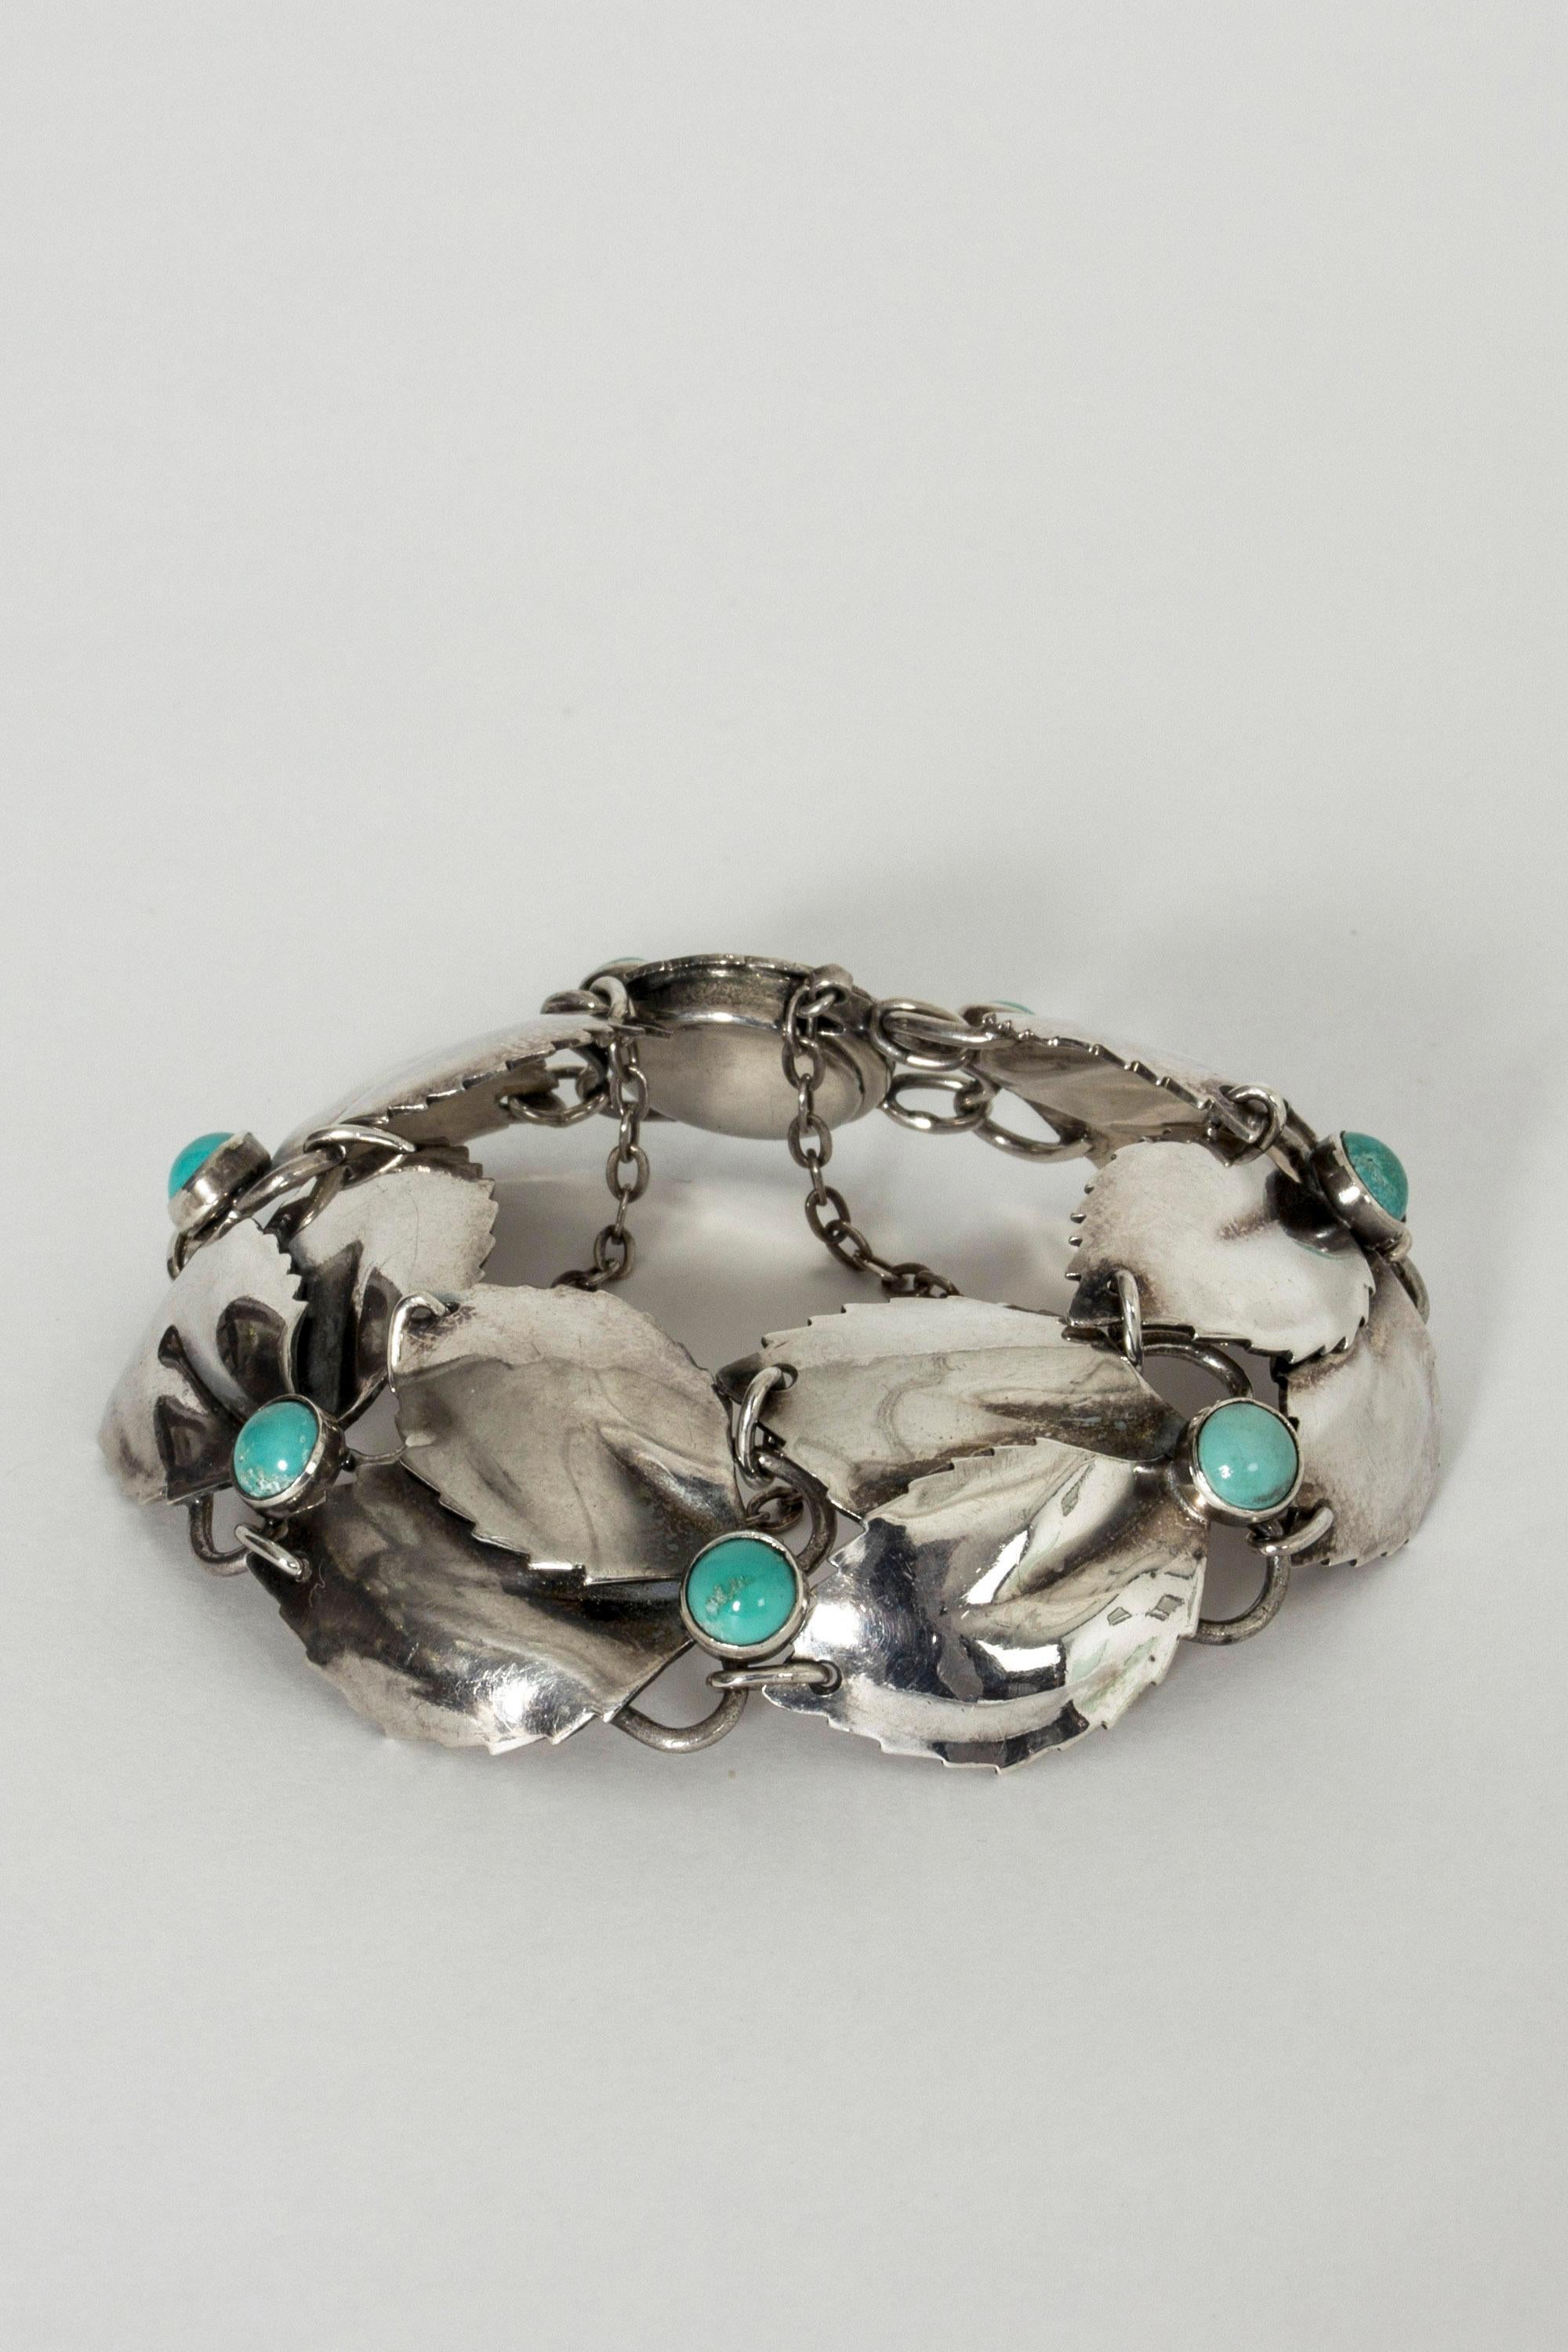 Elegant silver bracelet by Gertrud Engel, made in the shape of leaves adorned with turquoise stones. Beautiful lock with a security chain.